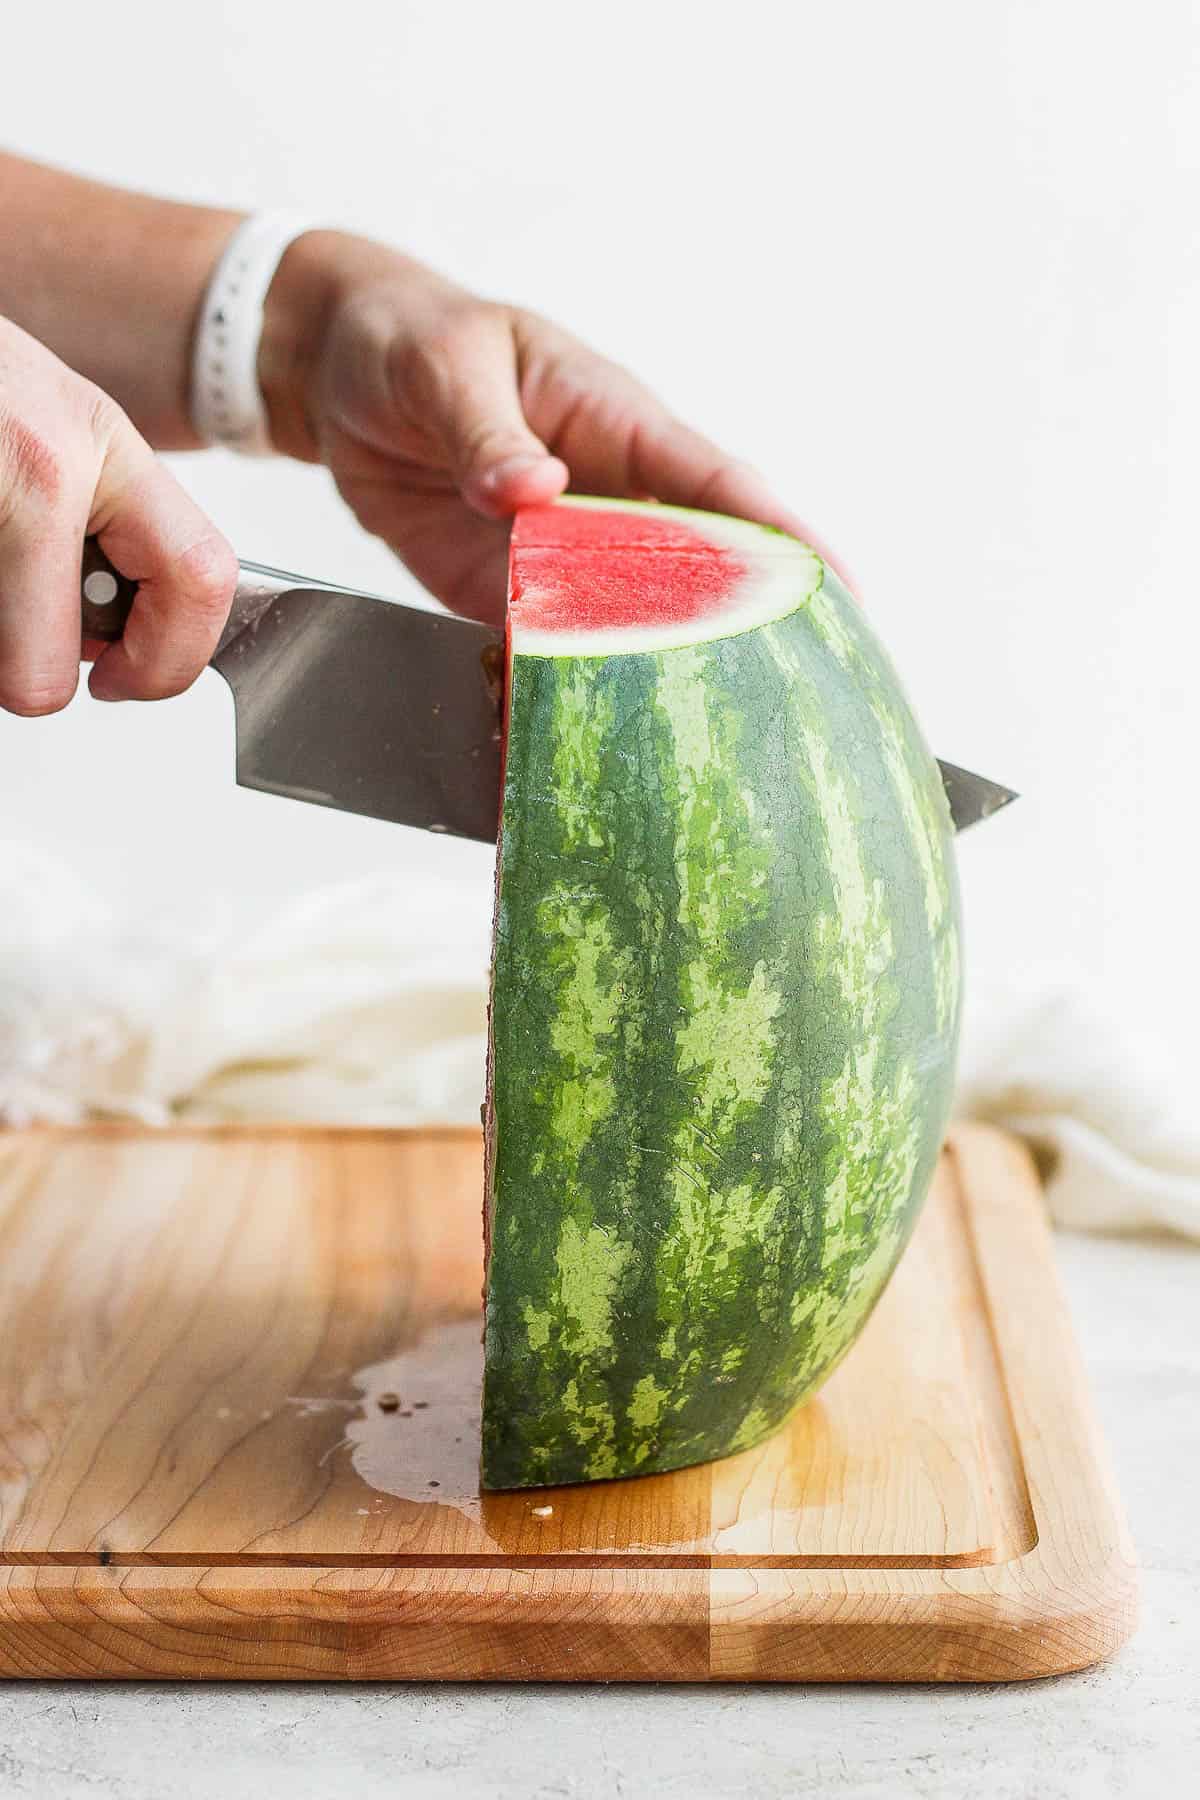 Half of a watermelon being cut into quarters.